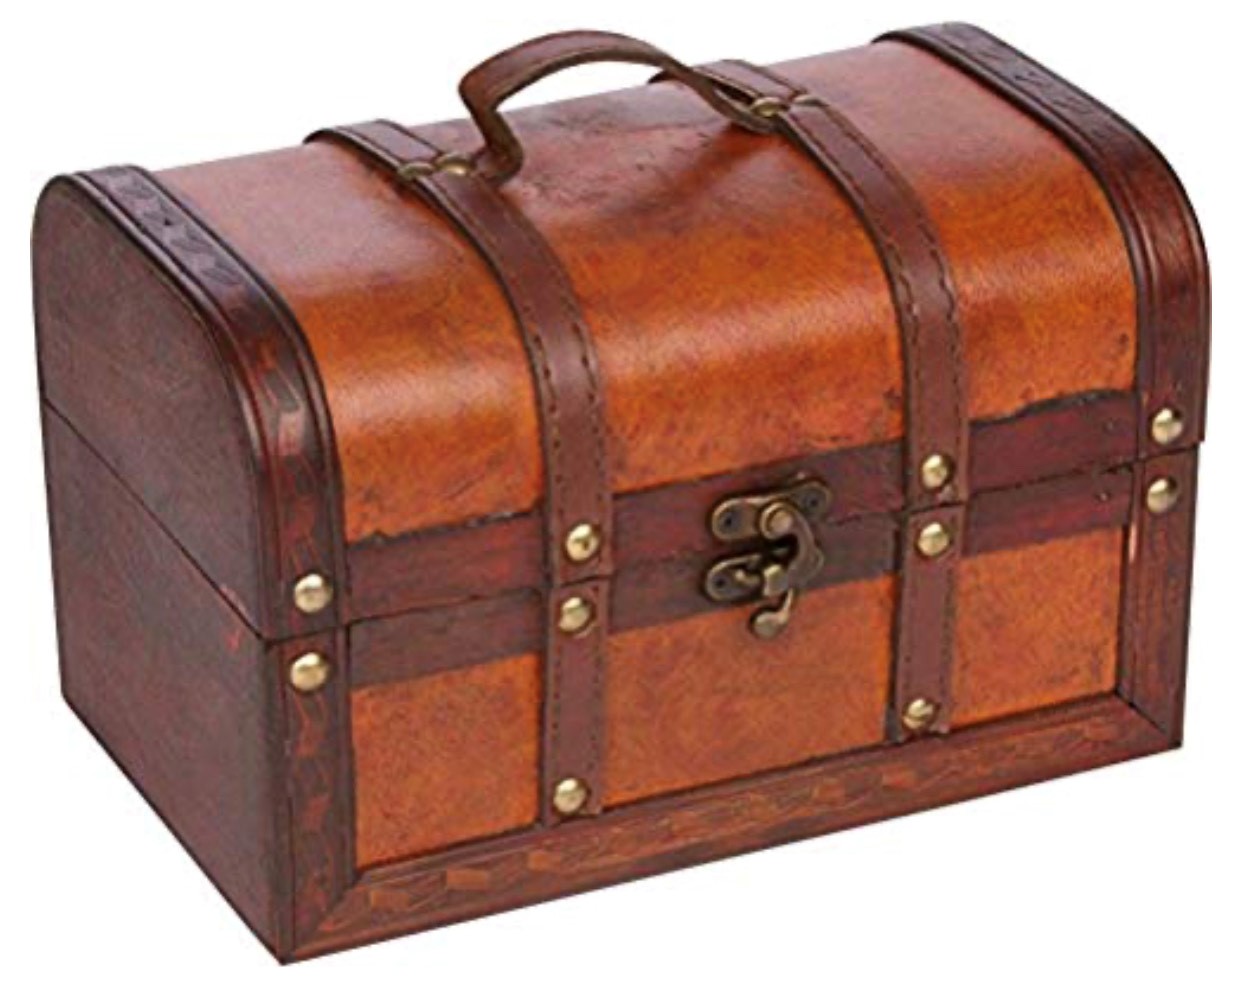 A brown and tan trunk with a handle.